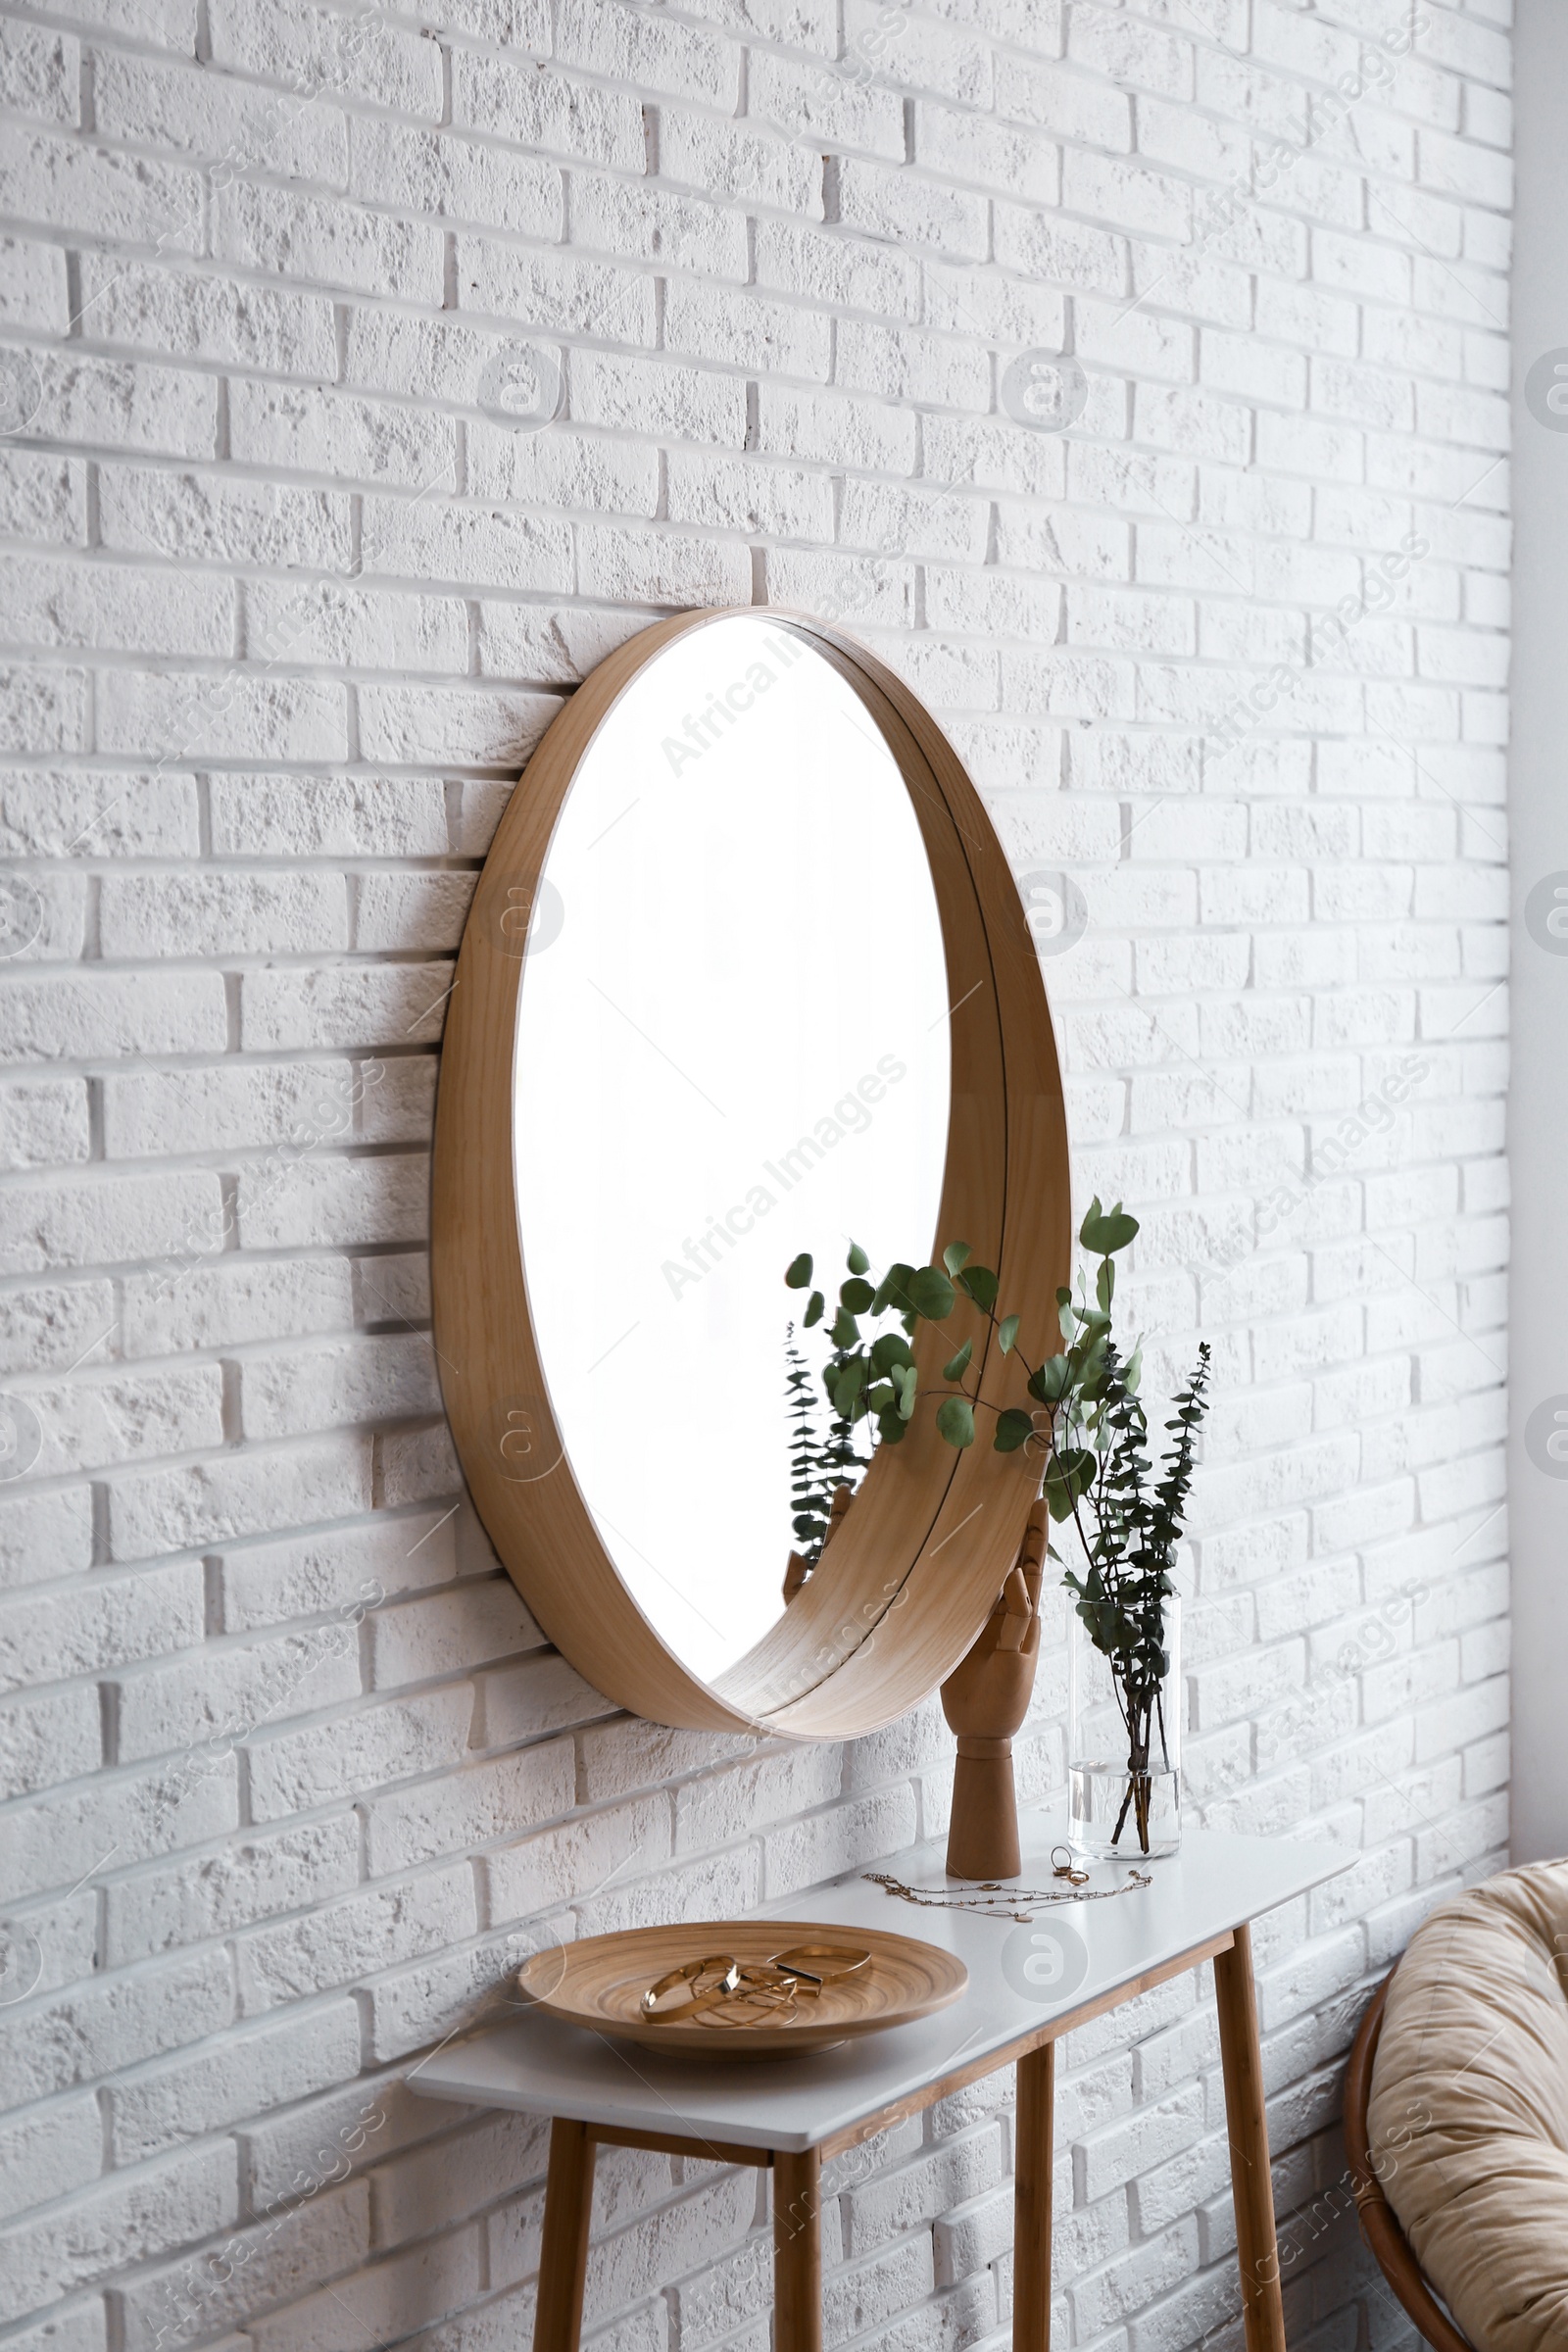 Photo of Big round mirror, table with jewelry and decor near brick wall in hallway interior